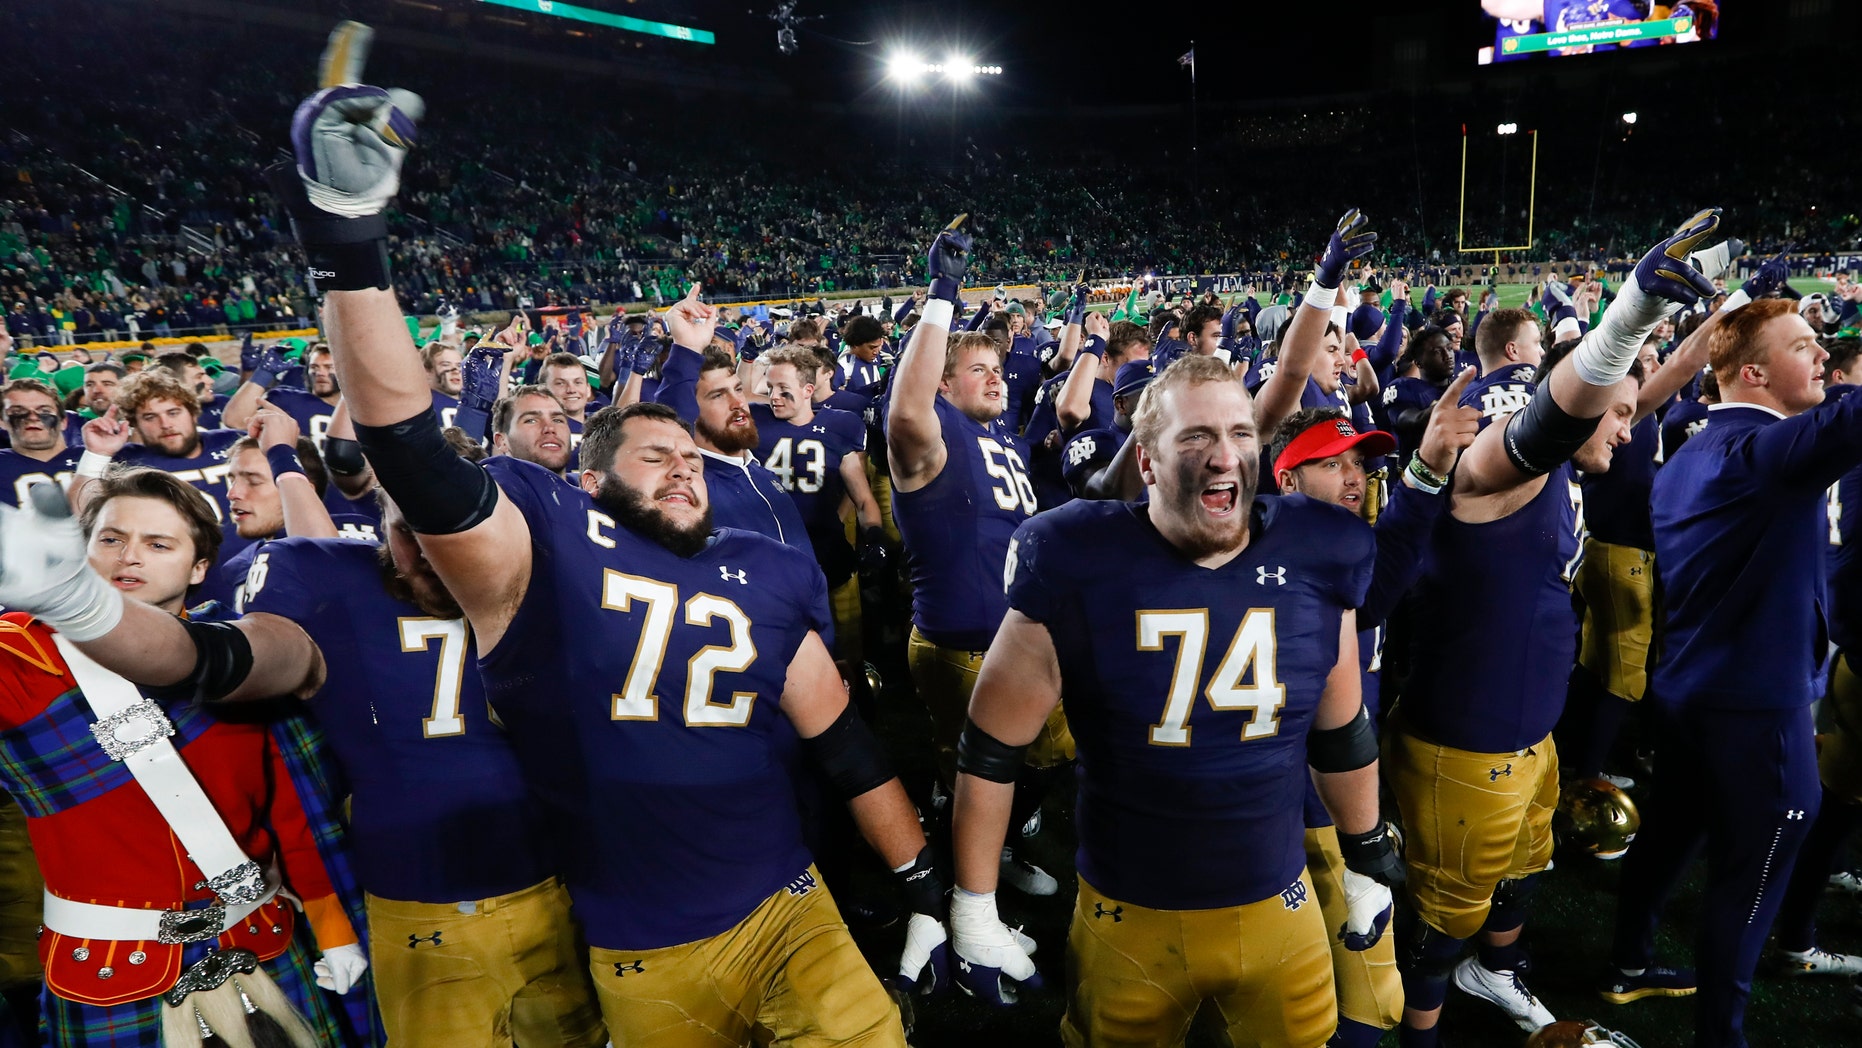 Notre Dame offensive linemen Robert Hainsey (72) and Liam Eichenberg (74) celebrate after defeating Southern California in an NCAA college football game in South Bend, Ind., Saturday, Oct. 12, 2019. (AP Photo/Paul Sancya)